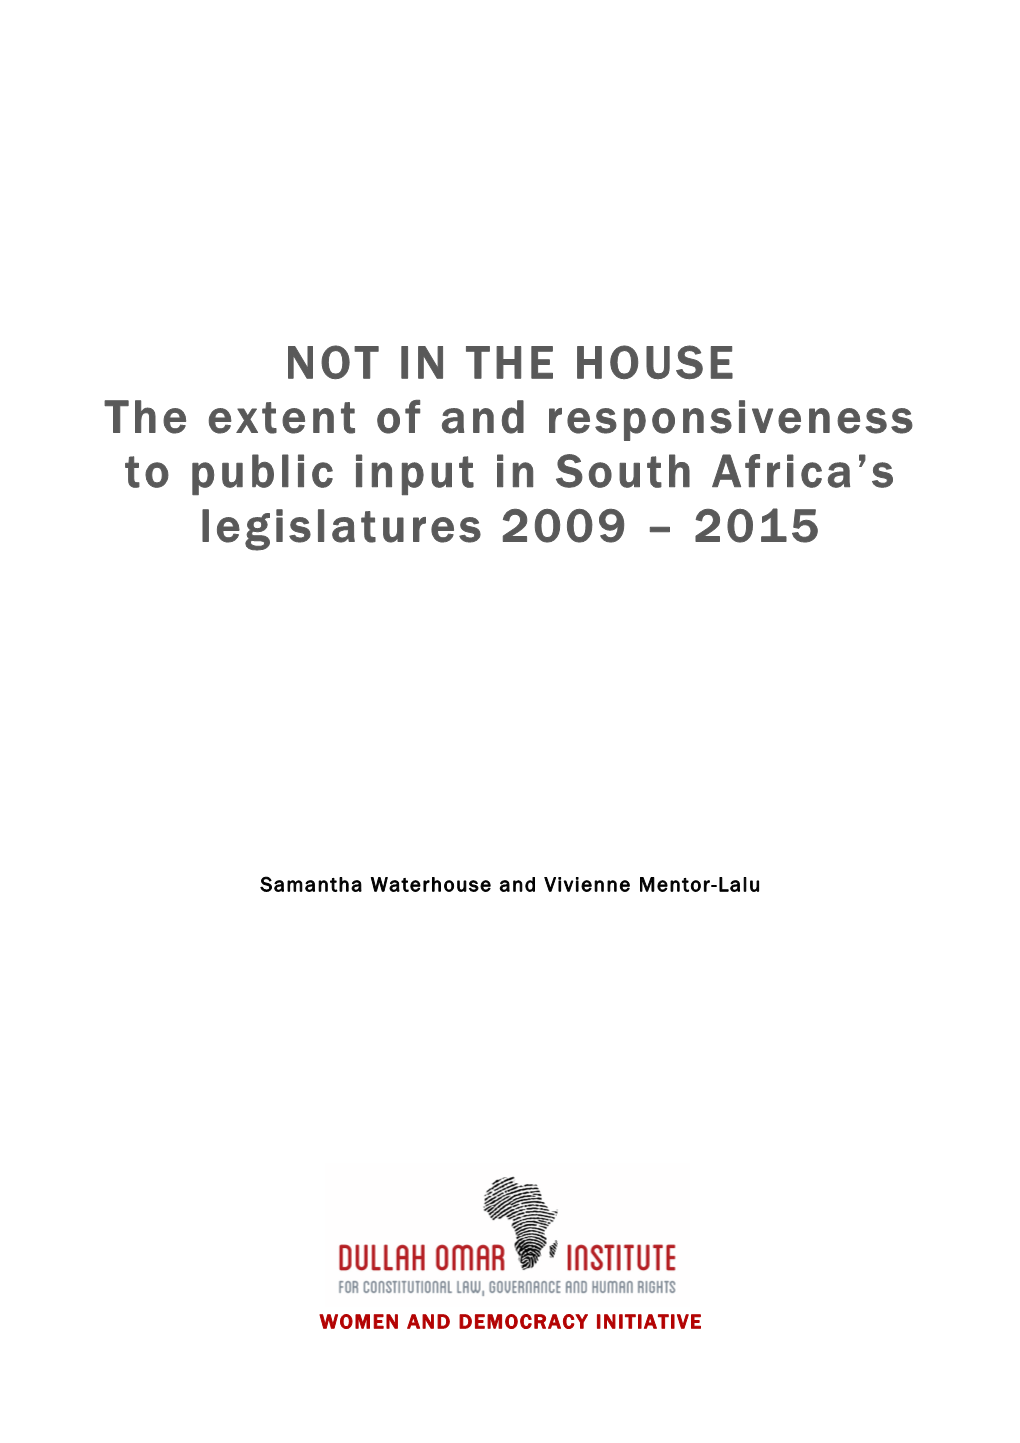 NOT in the HOUSE the Extent of and Responsiveness to Public Input in South Africa's Legislatures 2009 – 2015